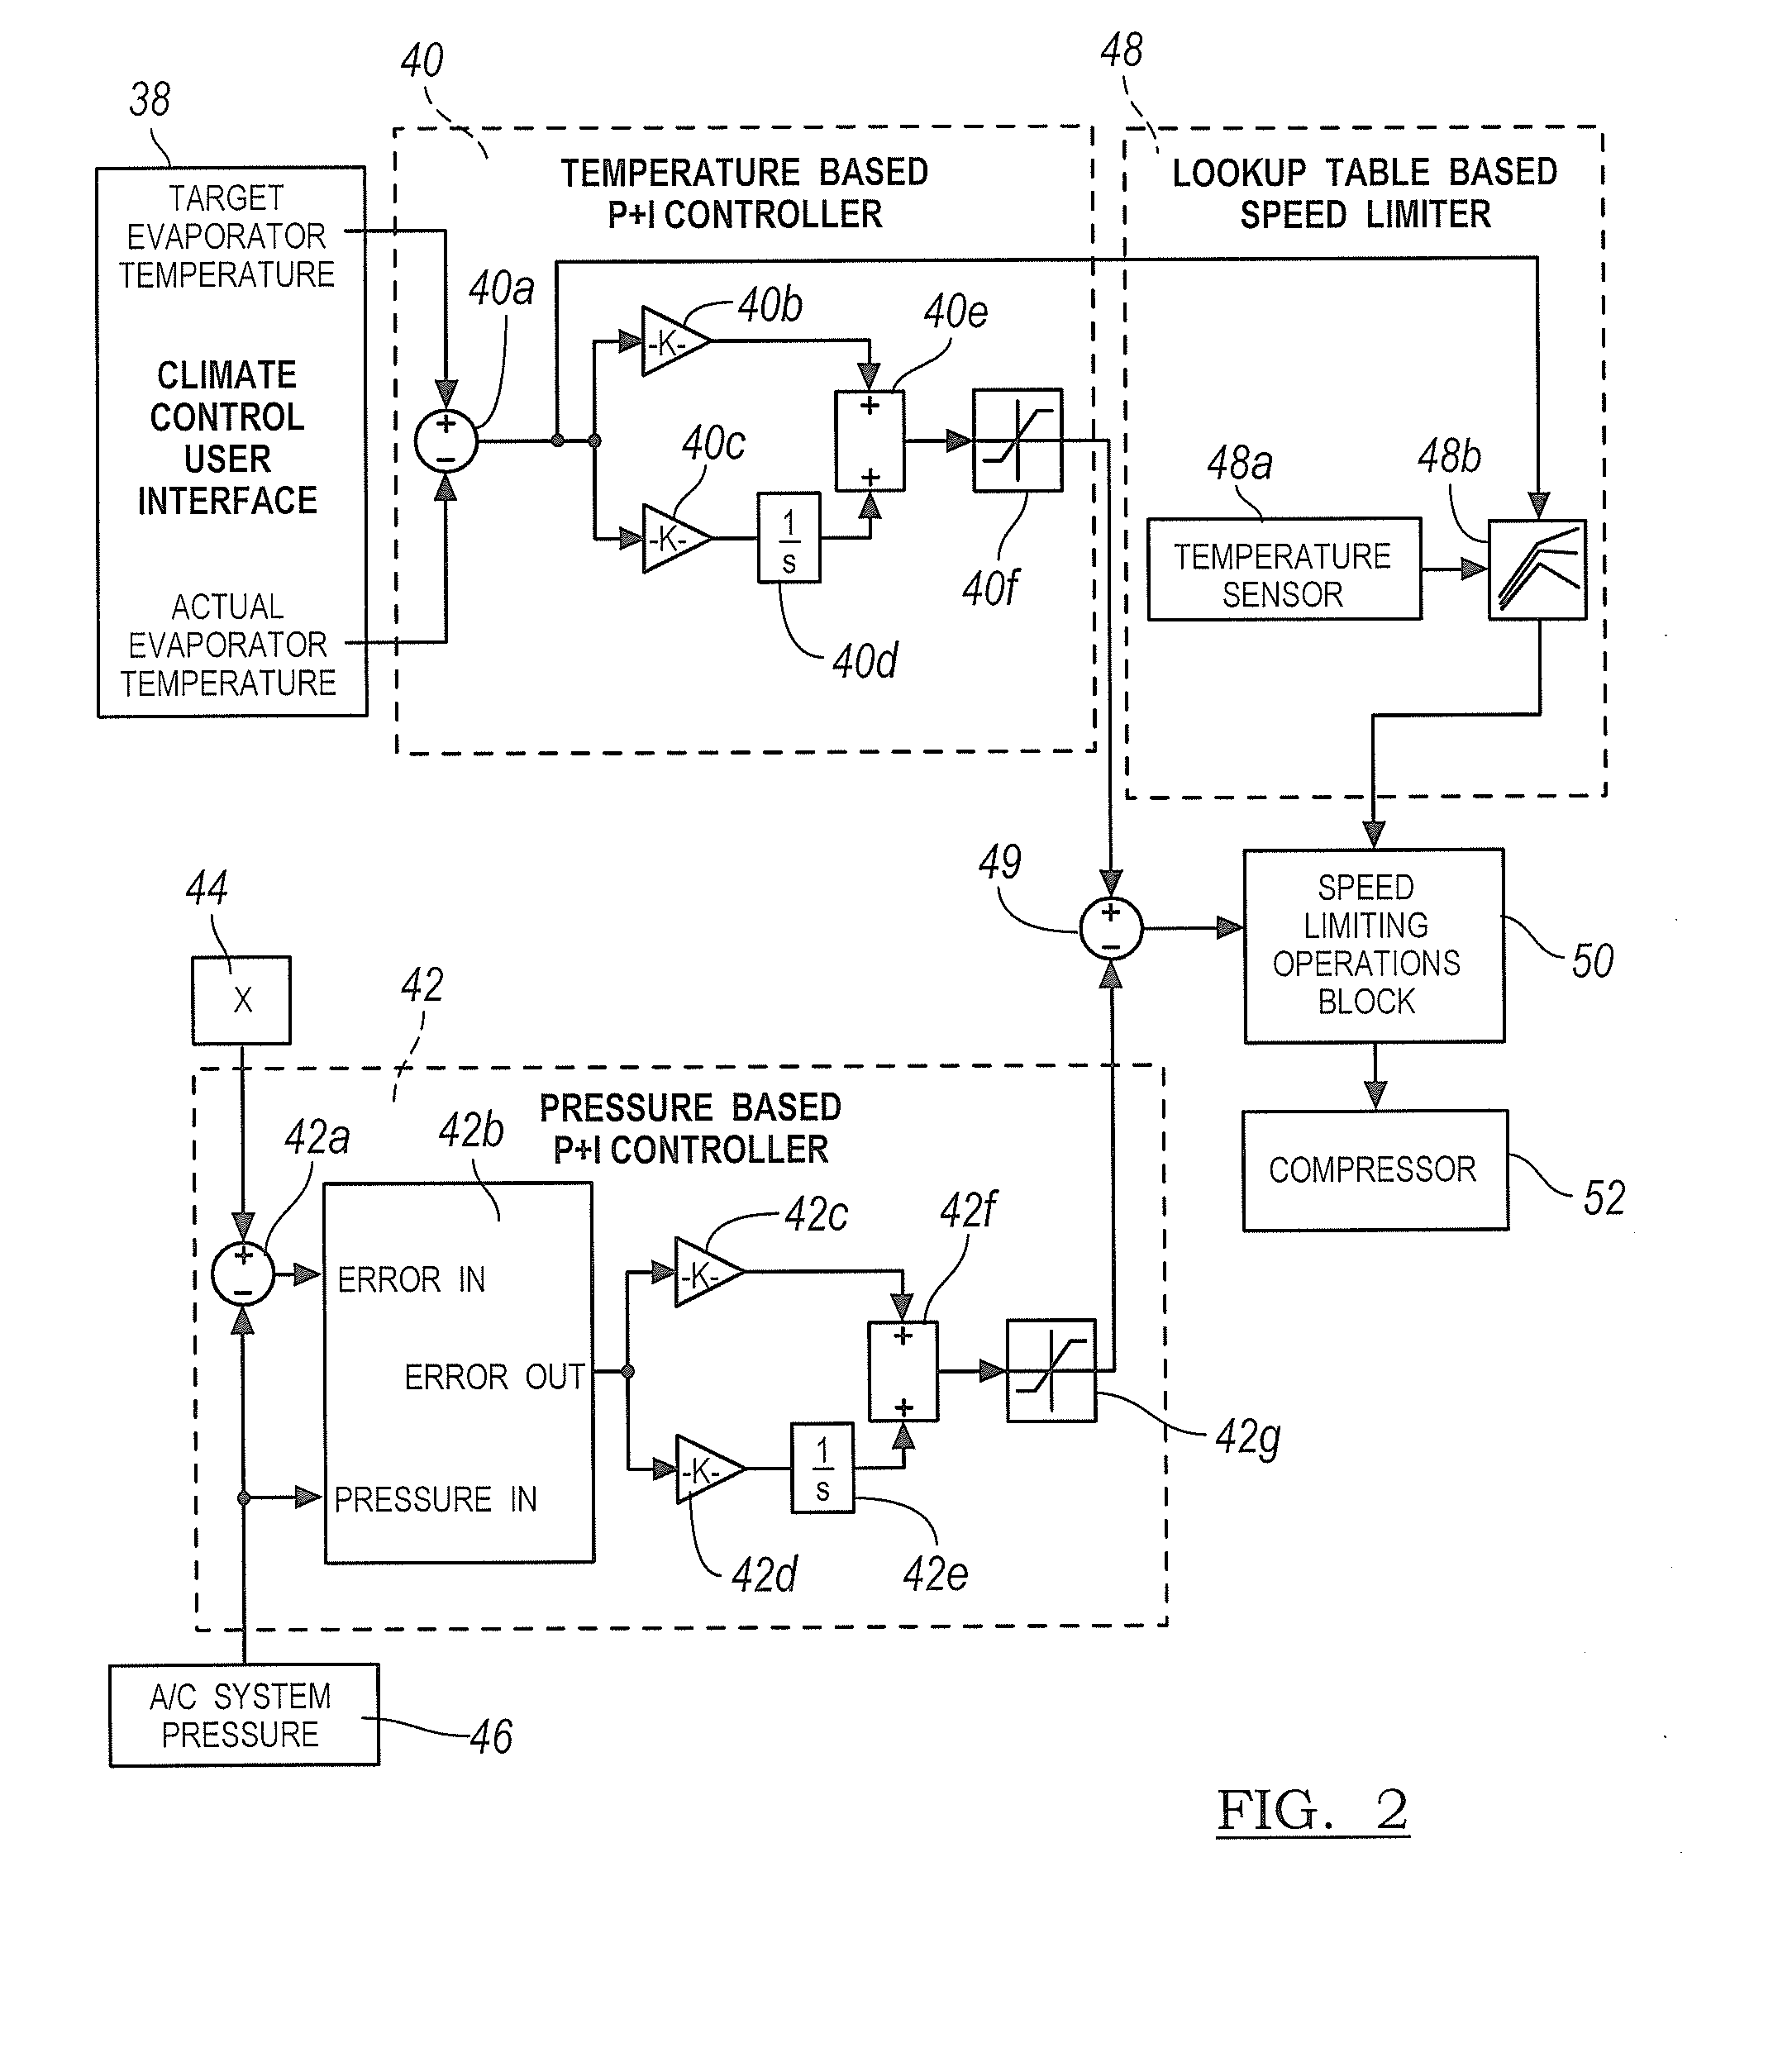 System and method for controlling a compressor